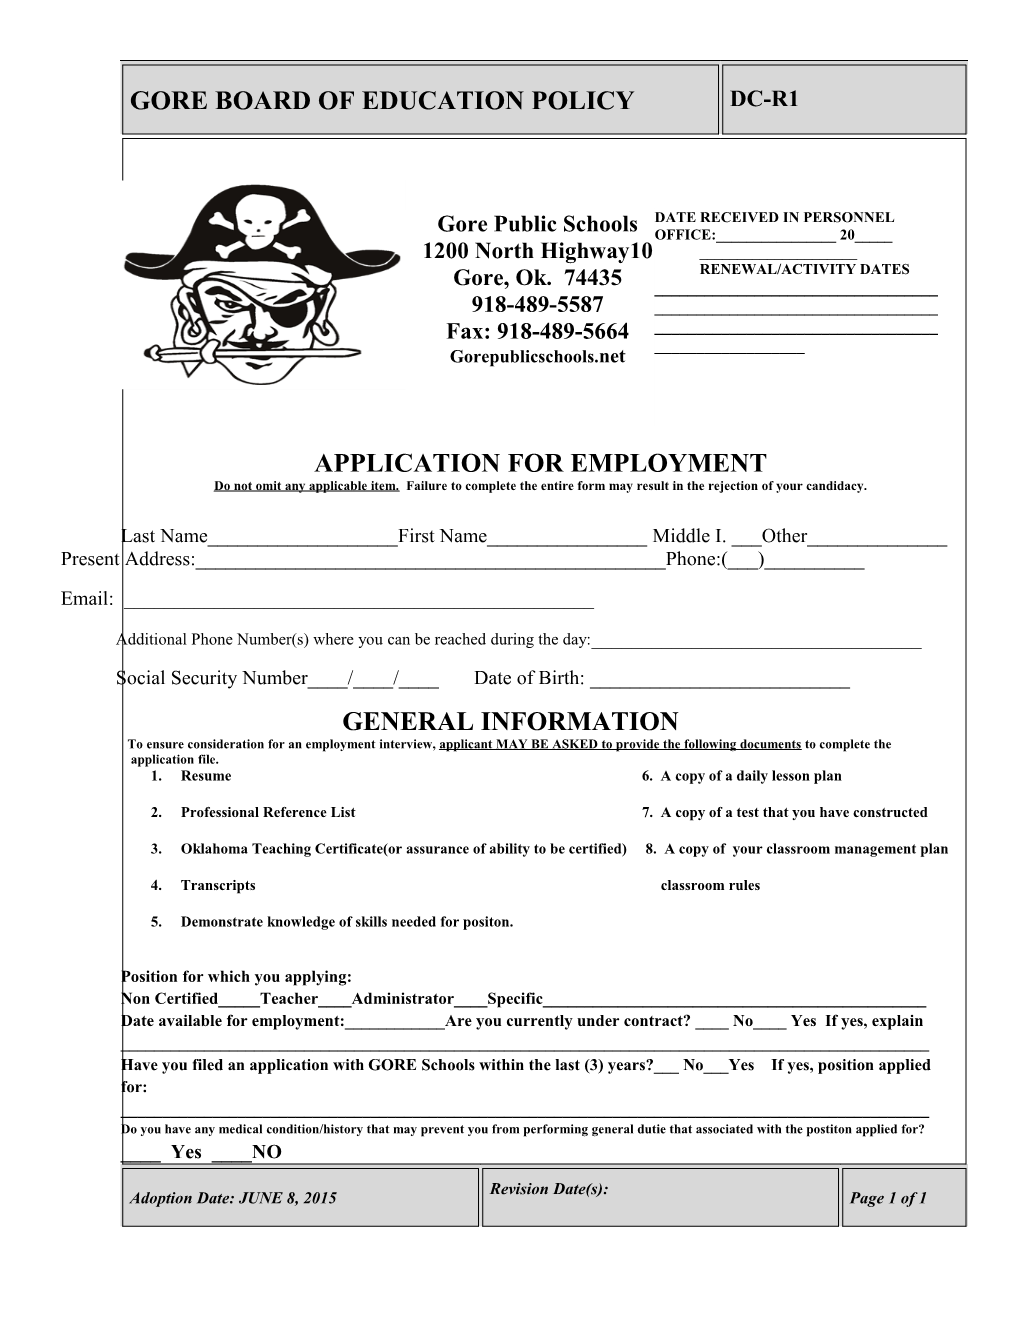 Application for Employment s134